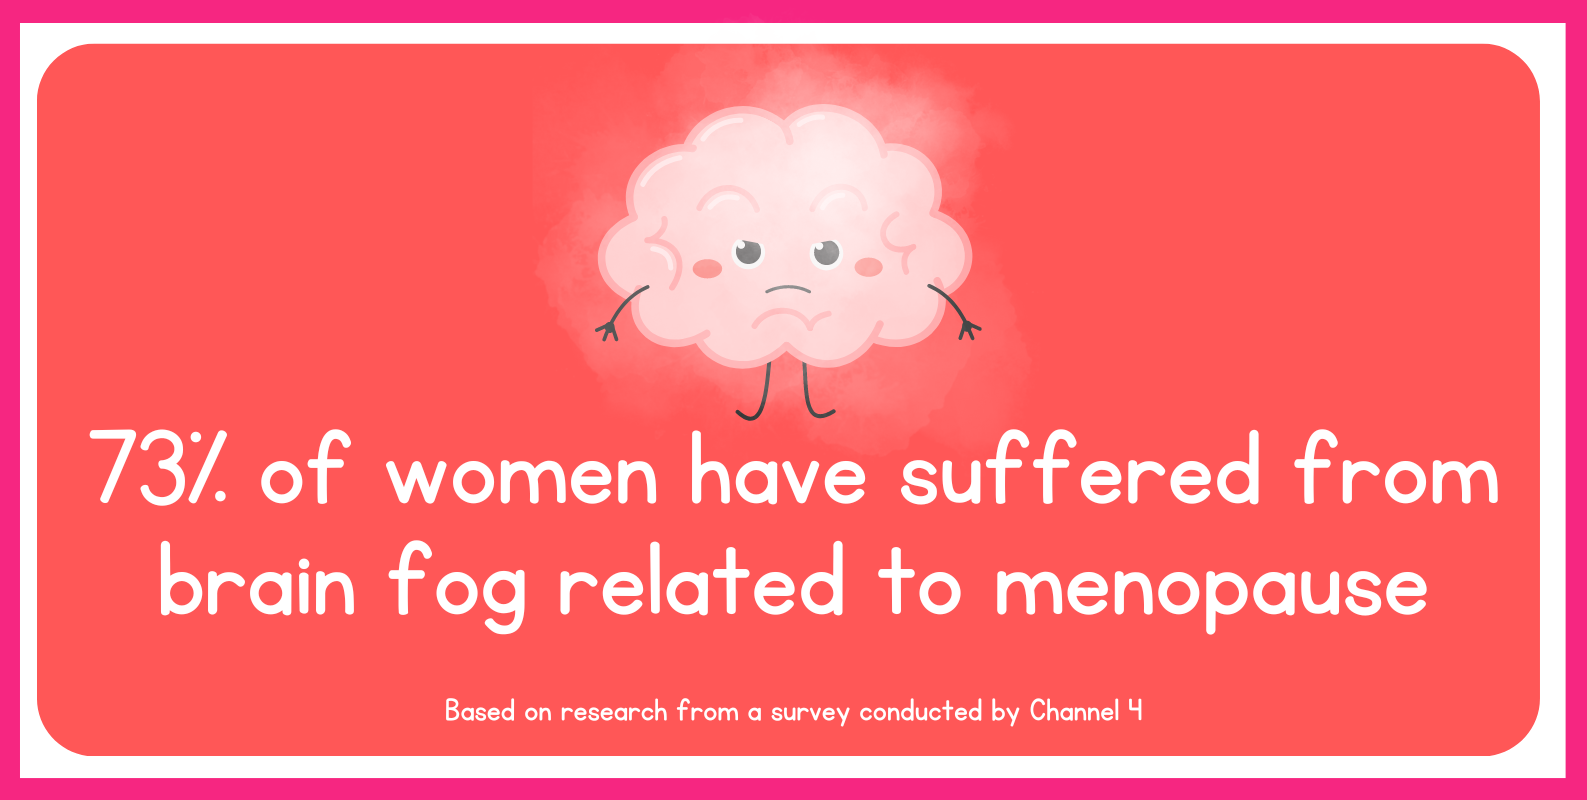 73% women have suffered from menopausal brain fog image